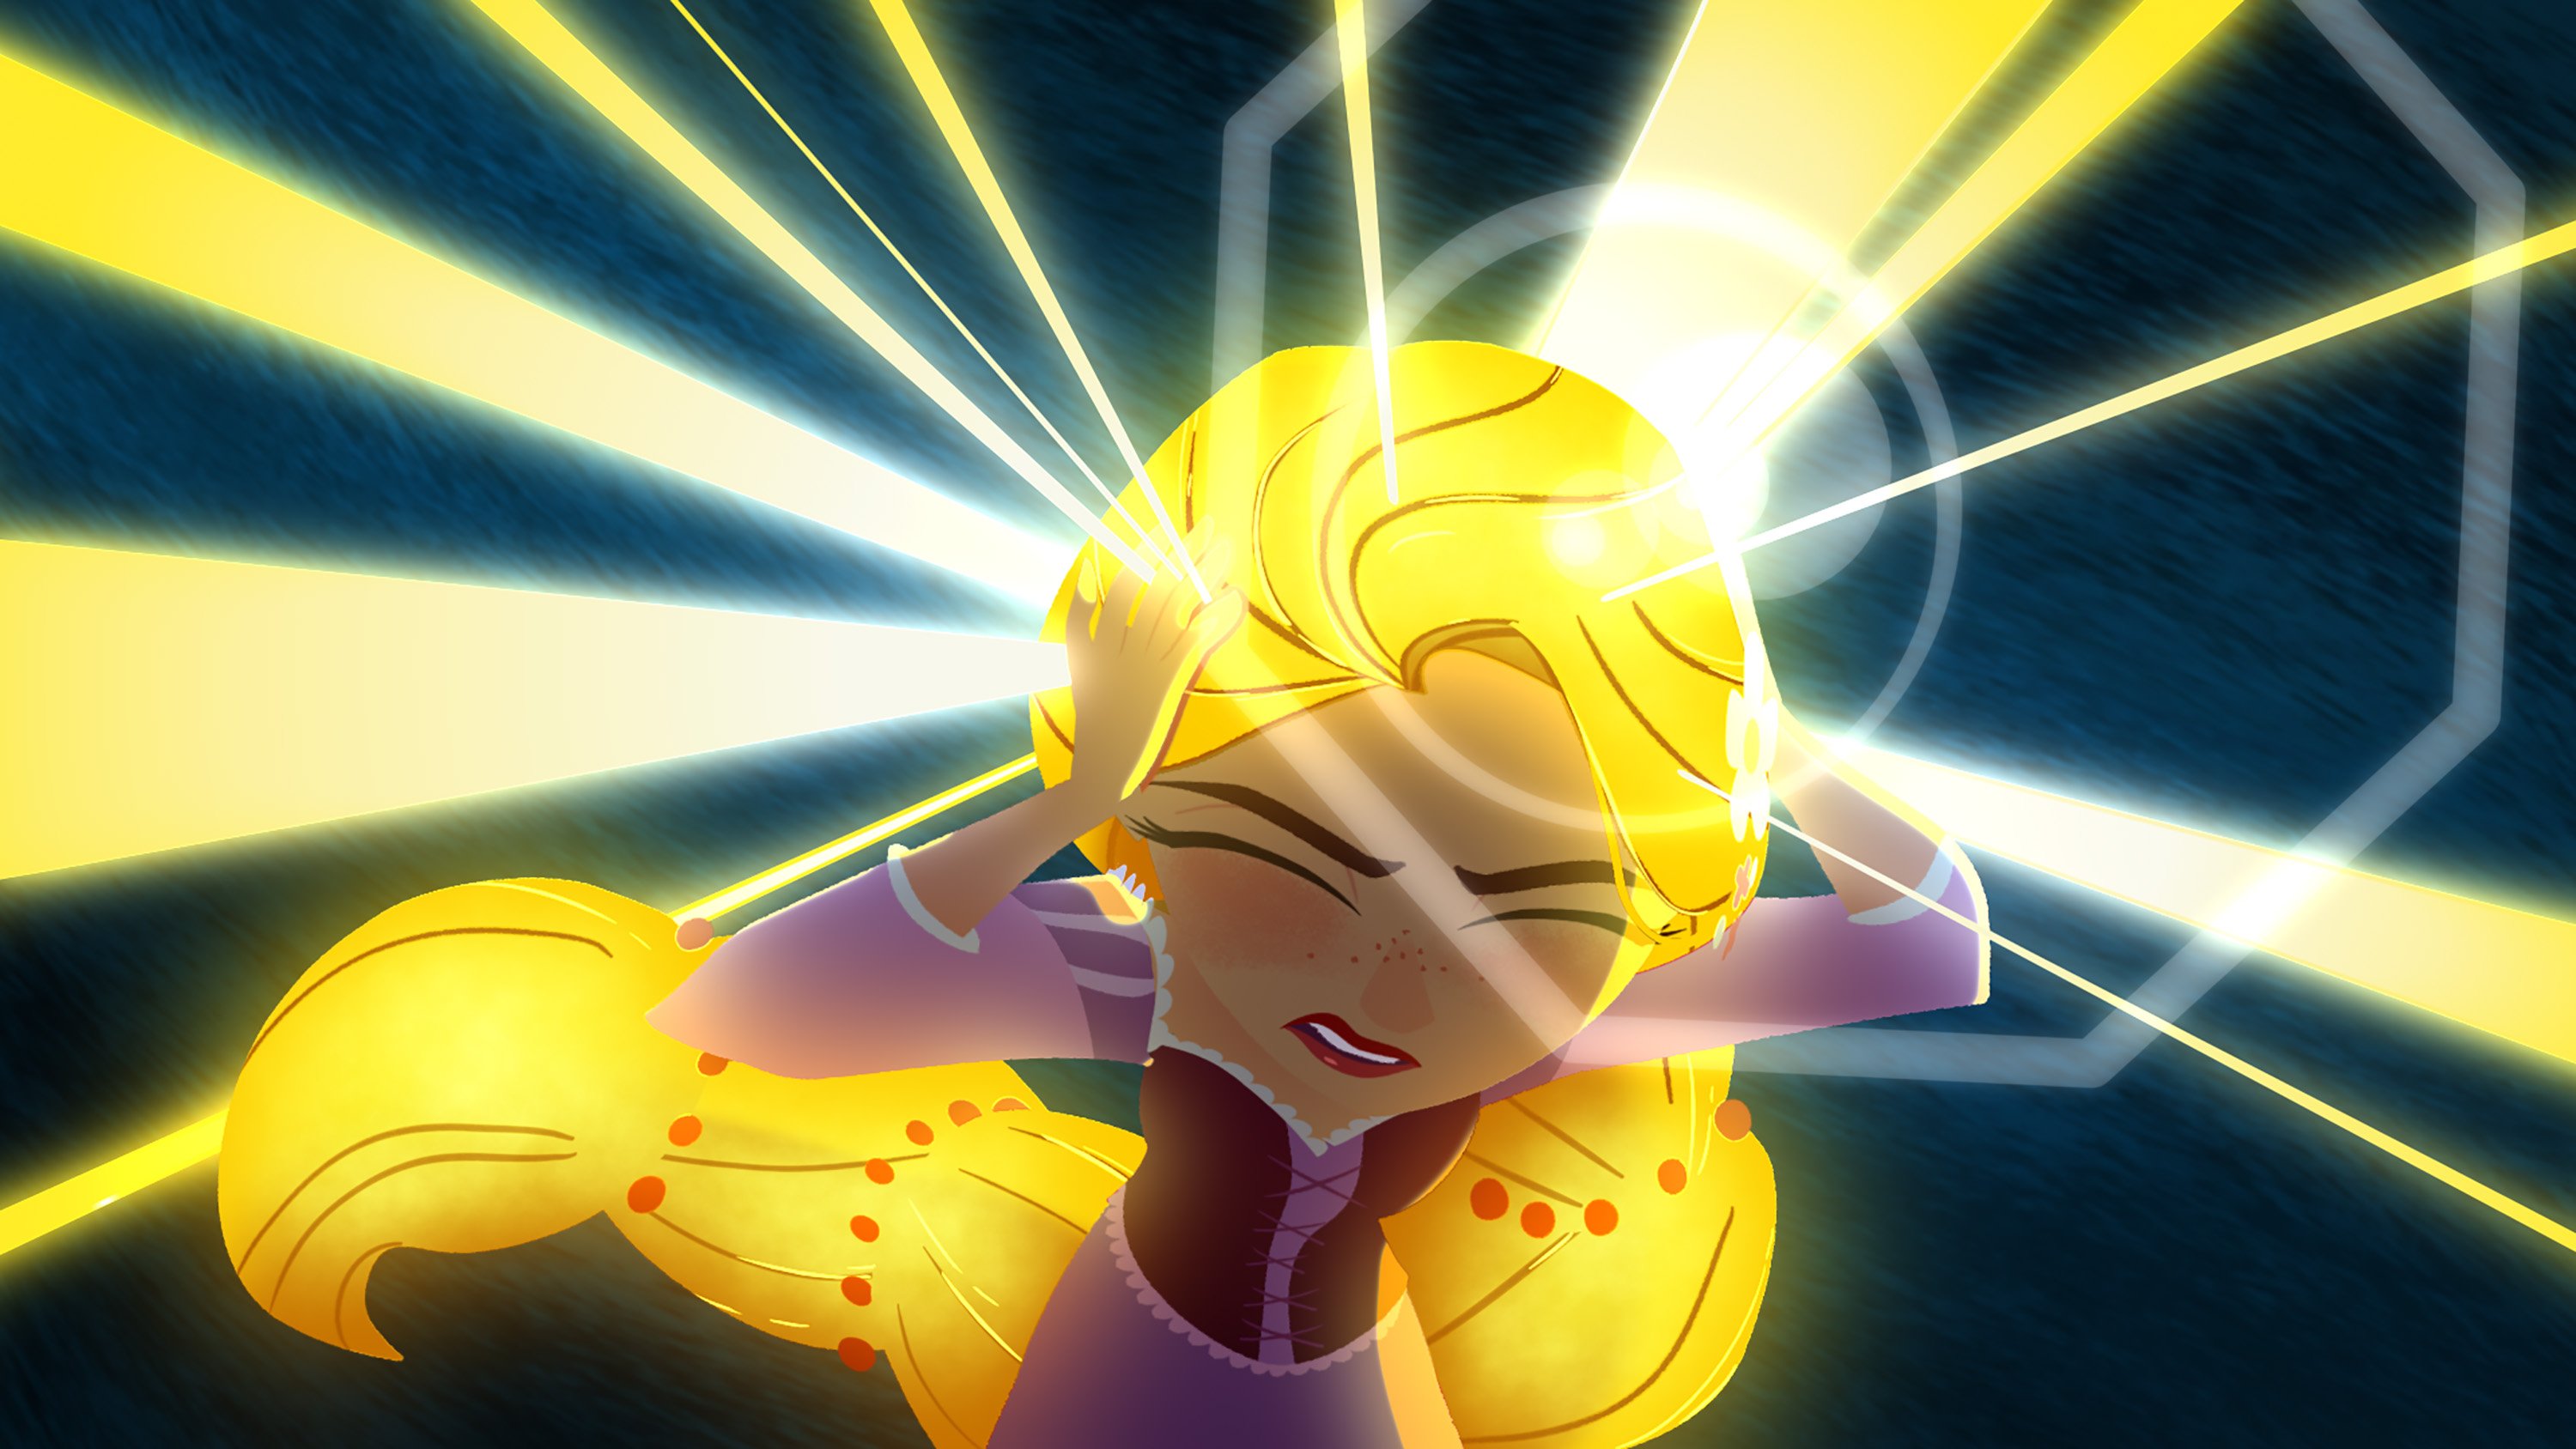 Disny Channel's 'Tangled: The Series'